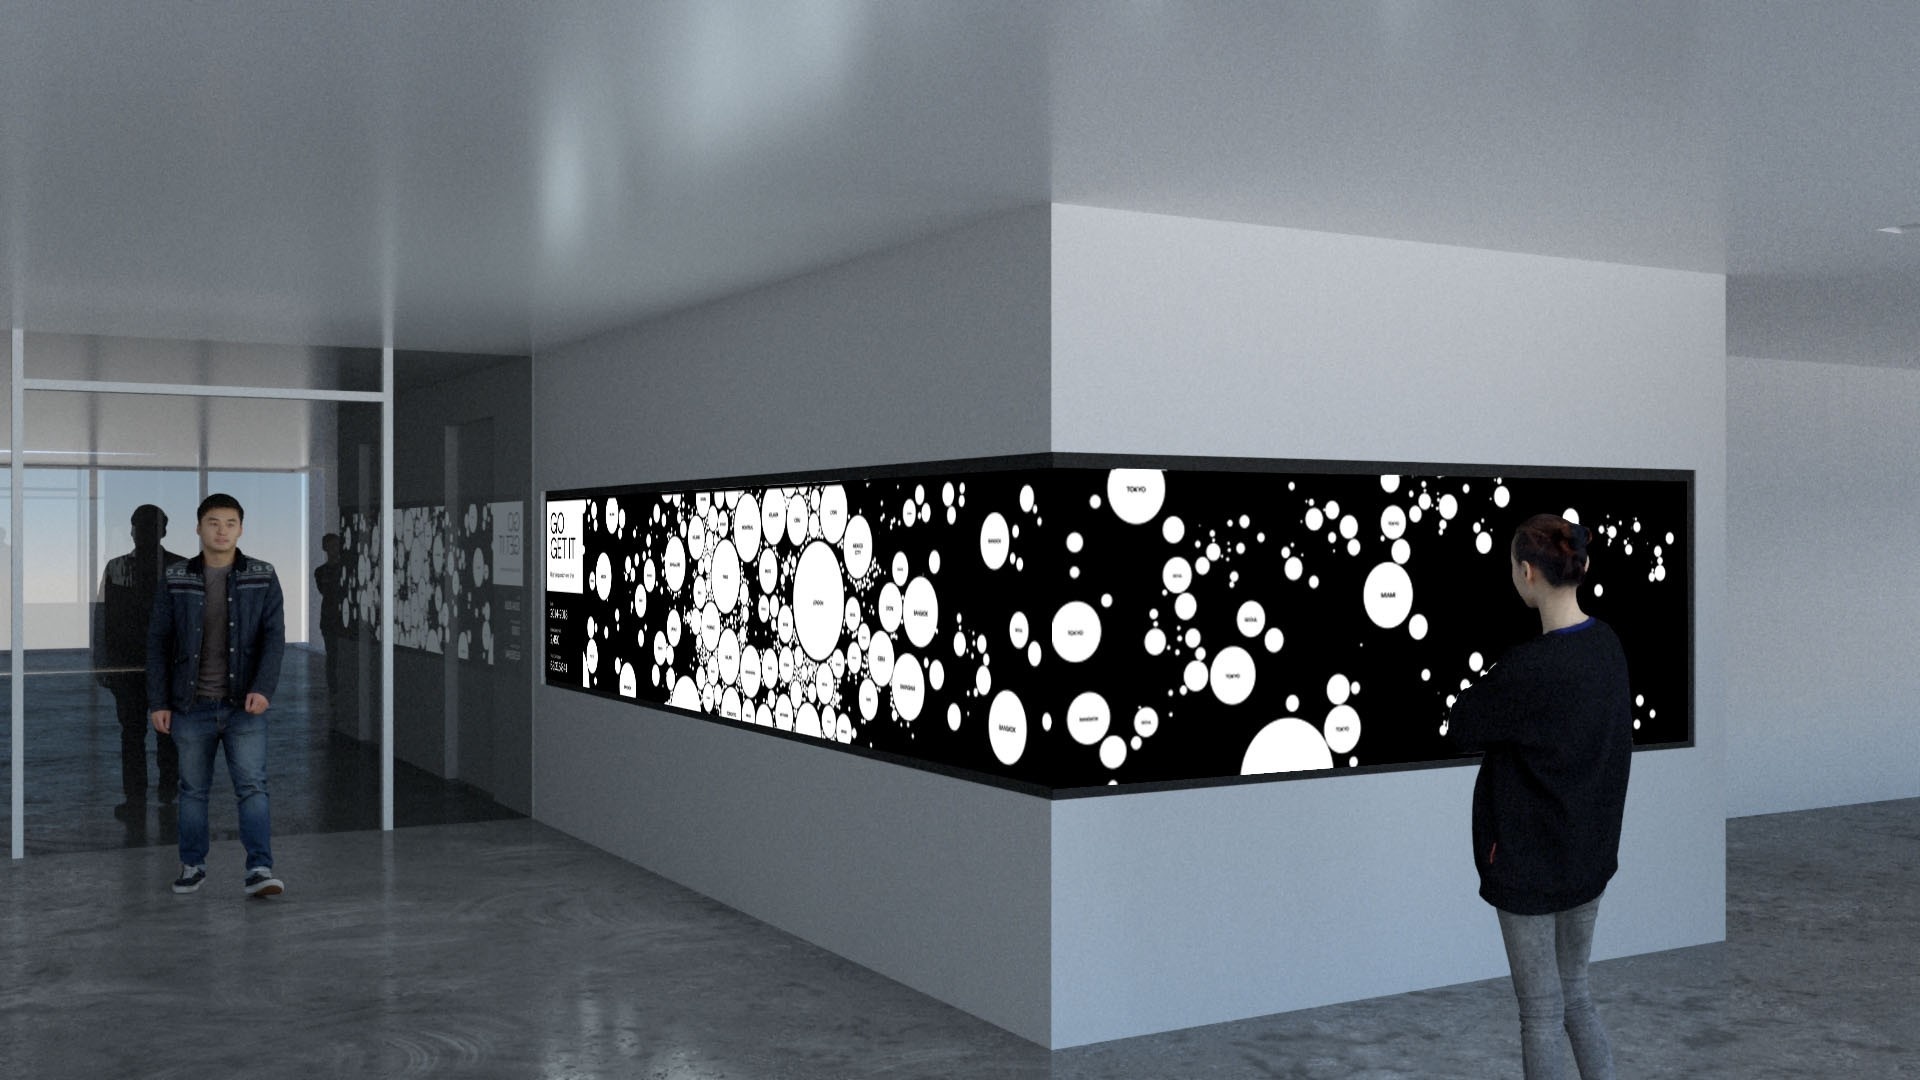 Digital screen wrapping around a corner with white circles on black background with two people standing in front of it.